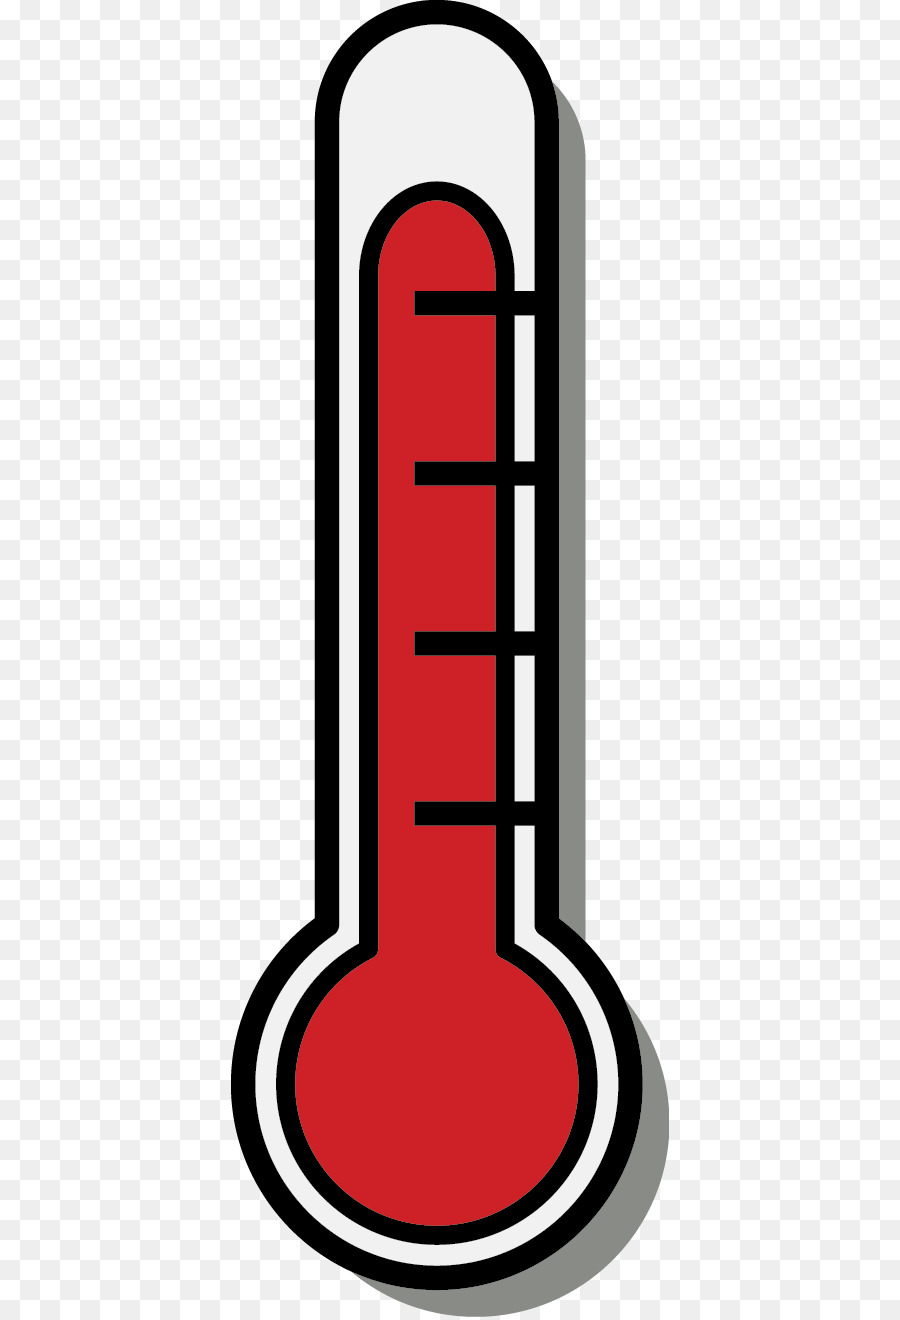 Thermometer clip art. Temperature hot weather cliparts